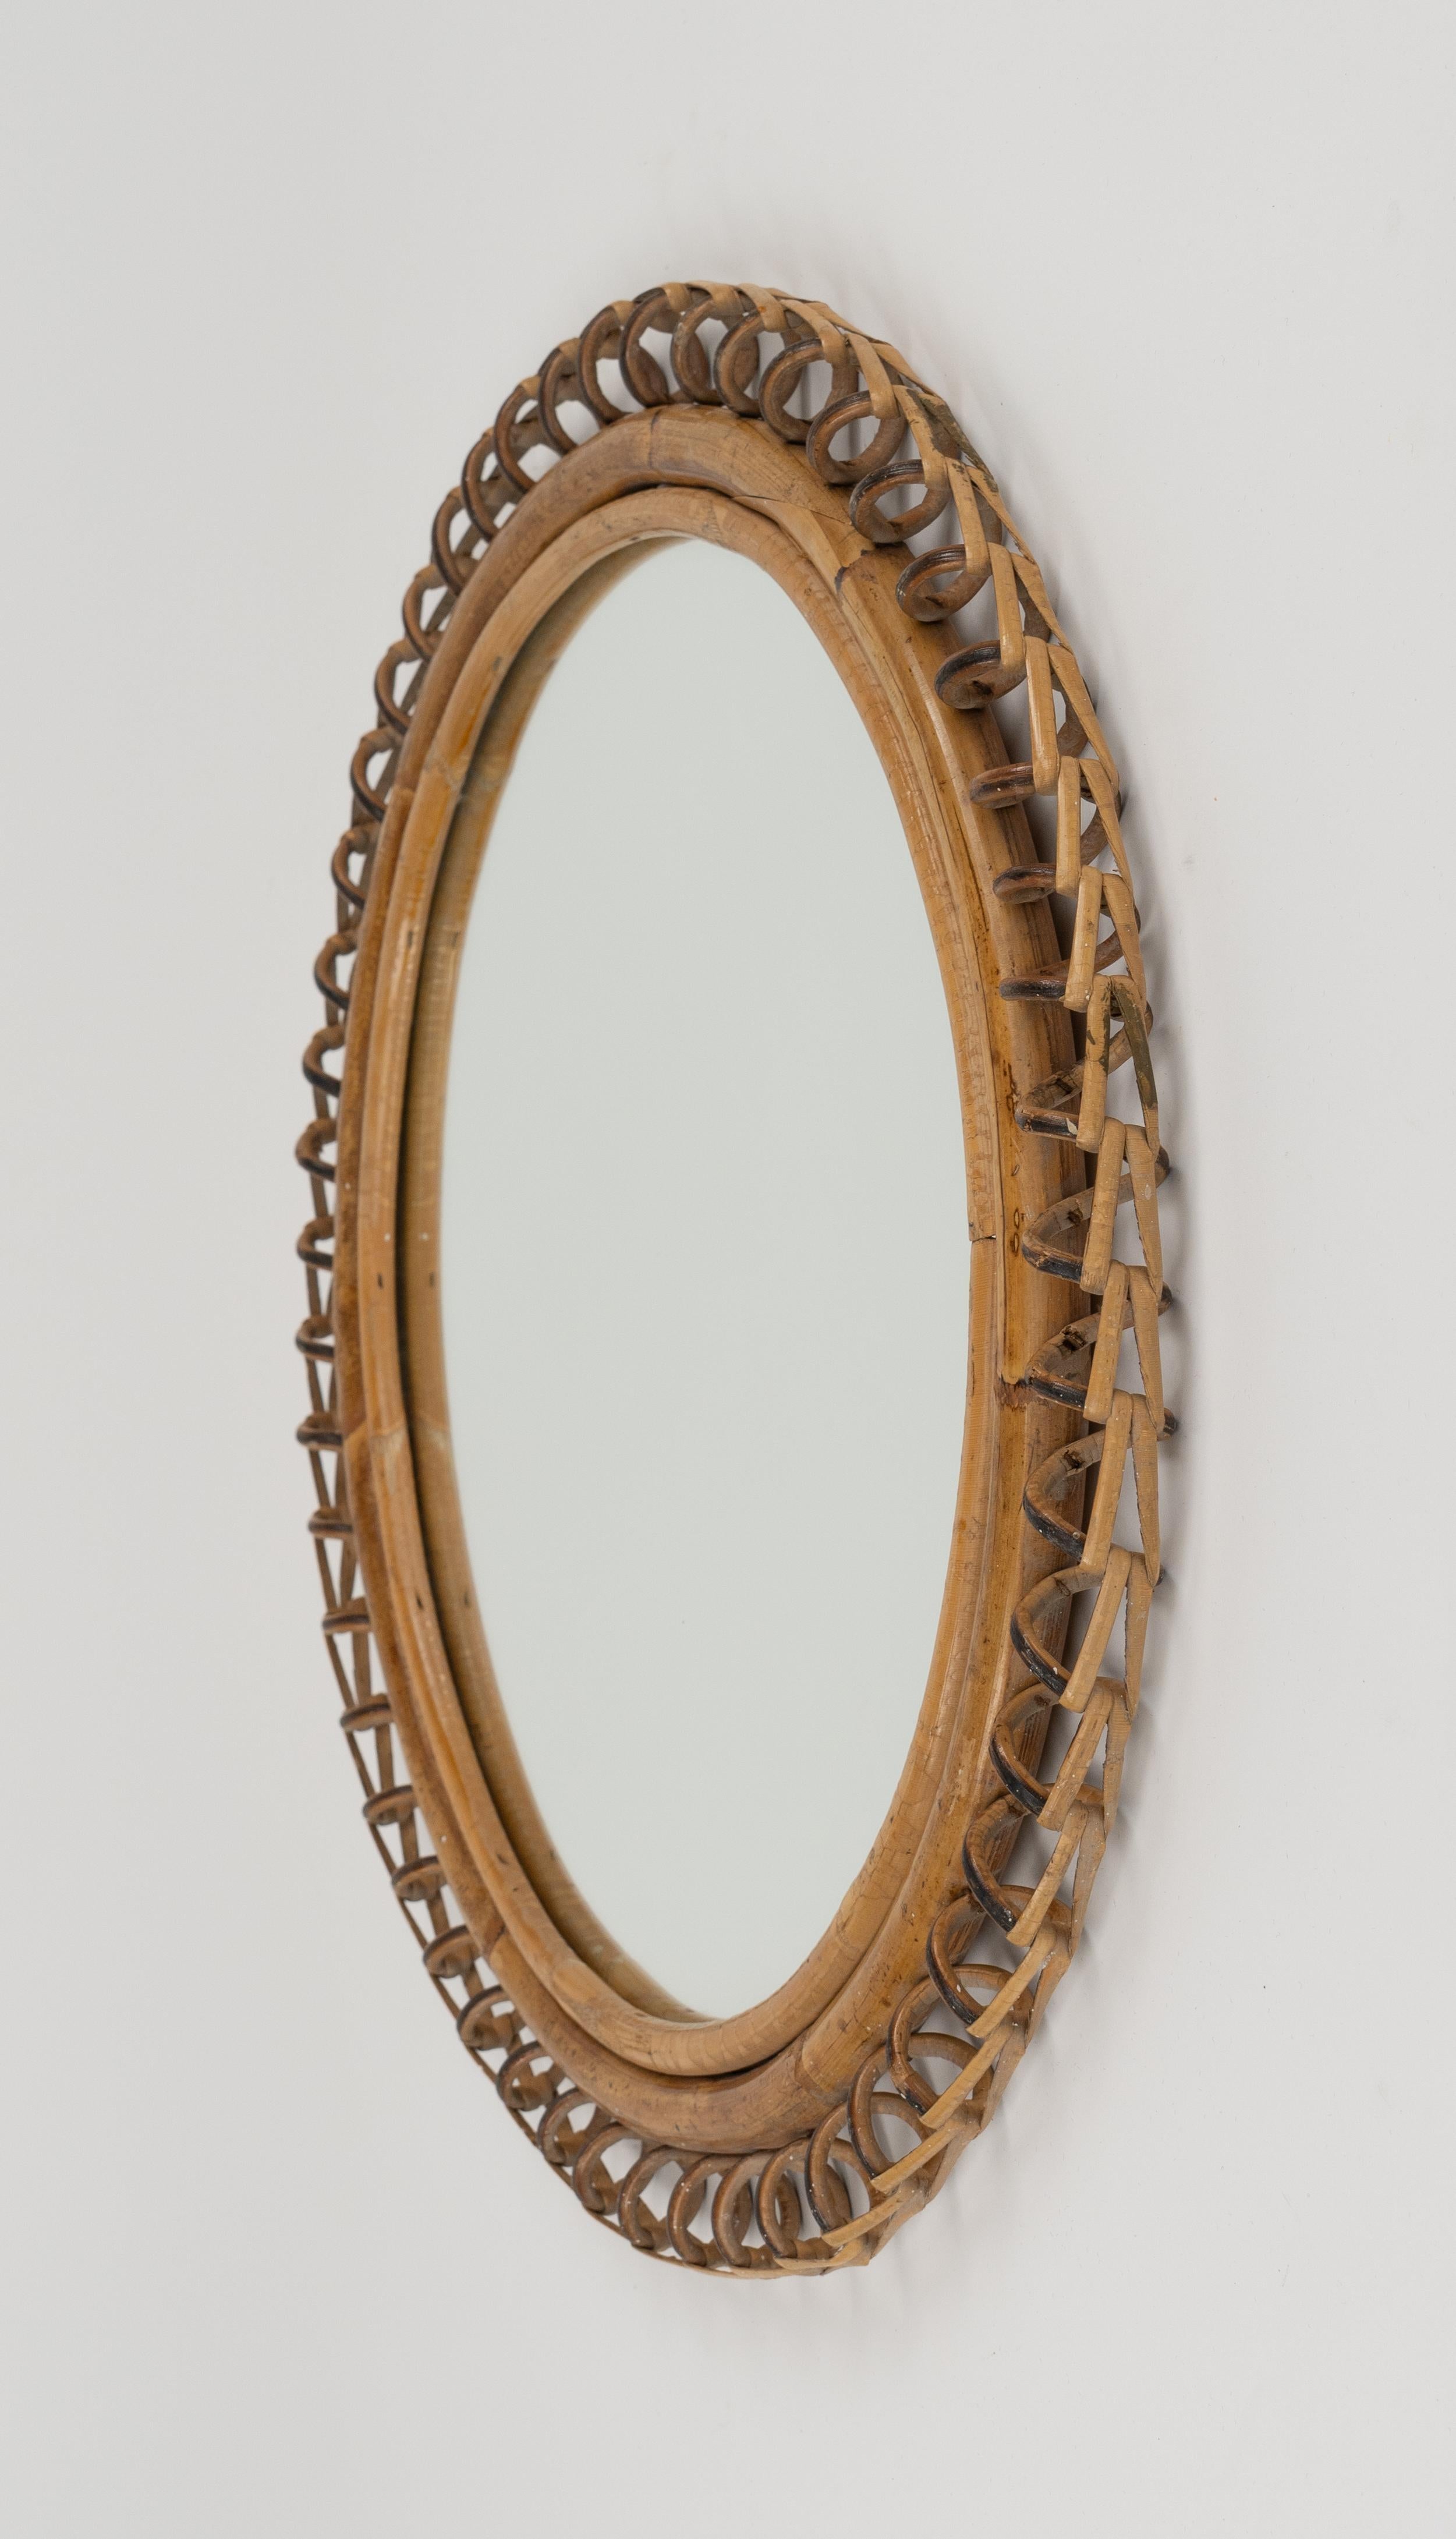 Midcentury Rattan and Bamboo Round Wall Mirror Franco Albini Style, Italy 1960s For Sale 2